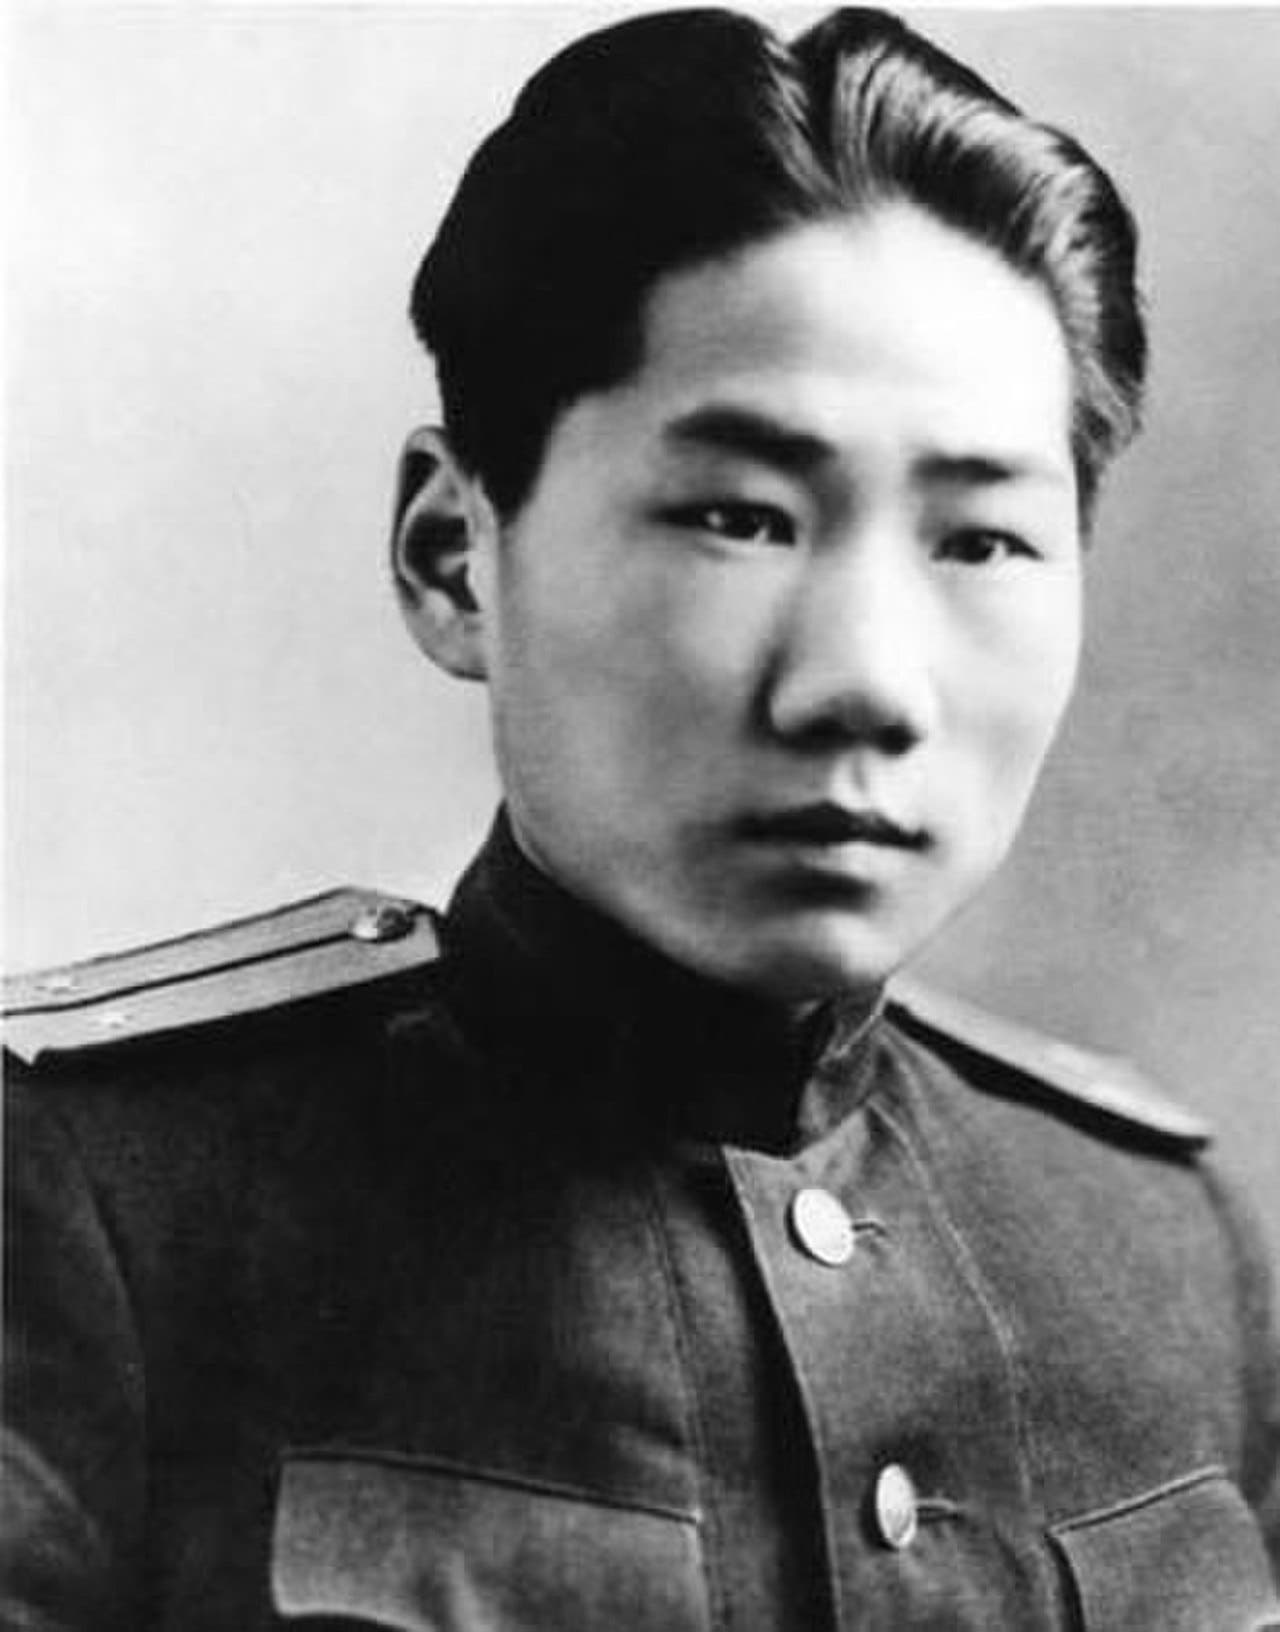 A portrait of Mao Anying, son of the founder of the People's Republic of China